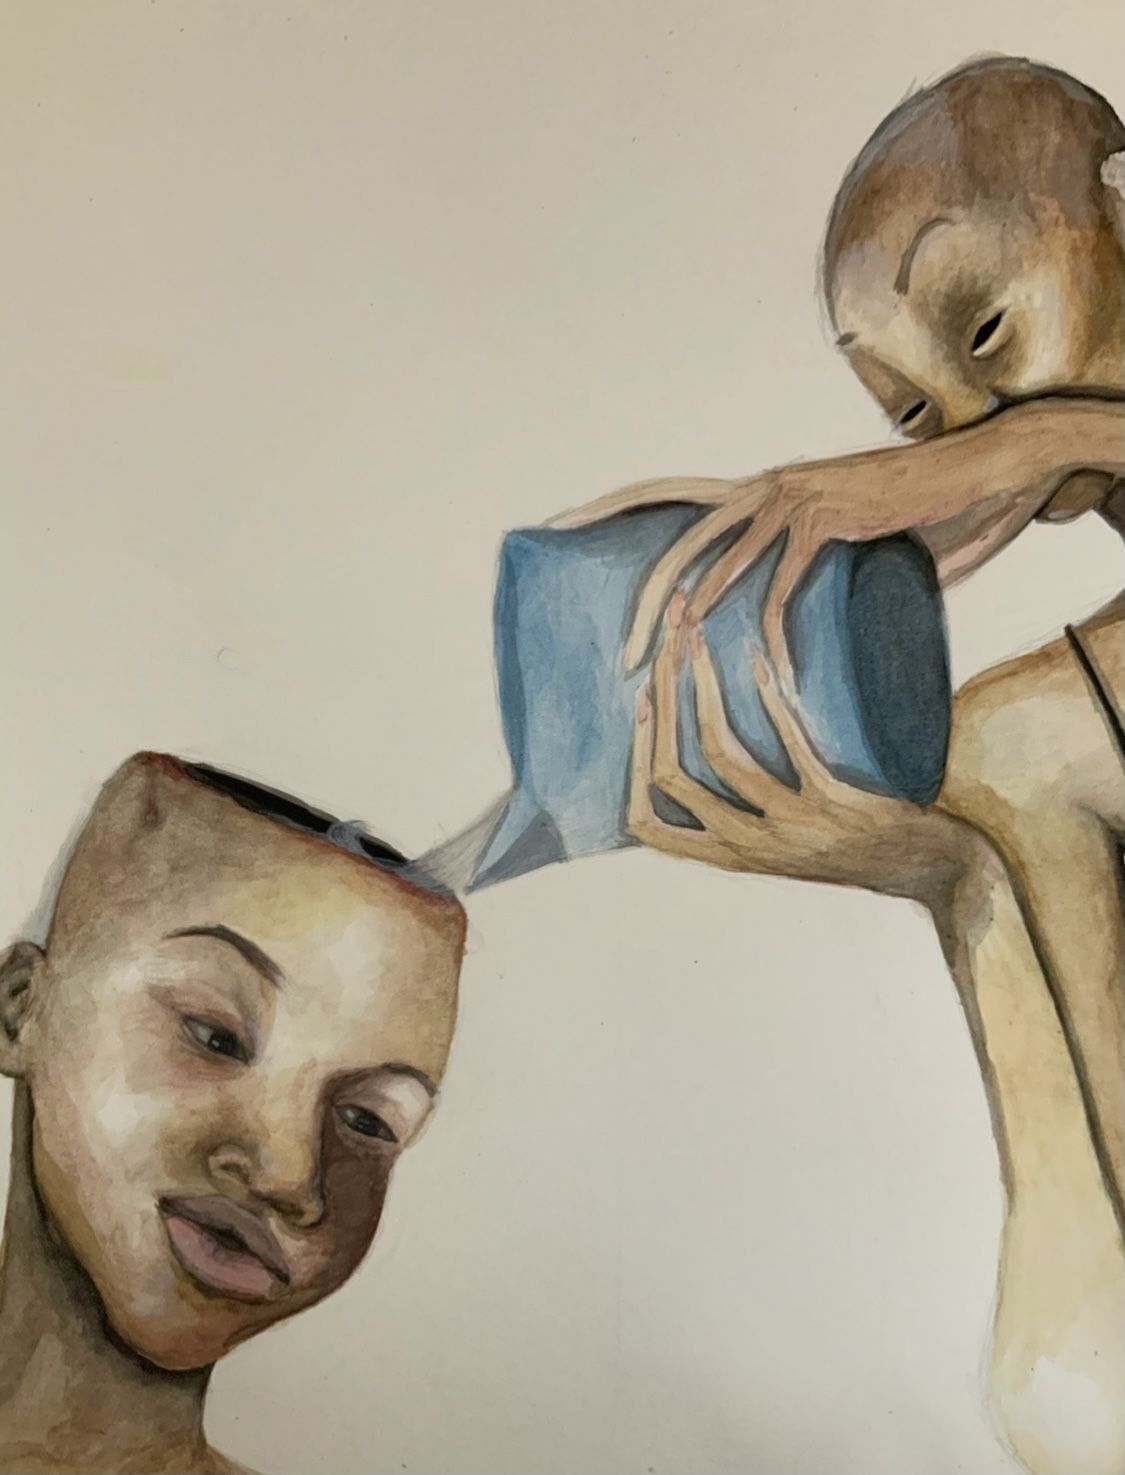 A painting of a person pouring liquid into another person's open head